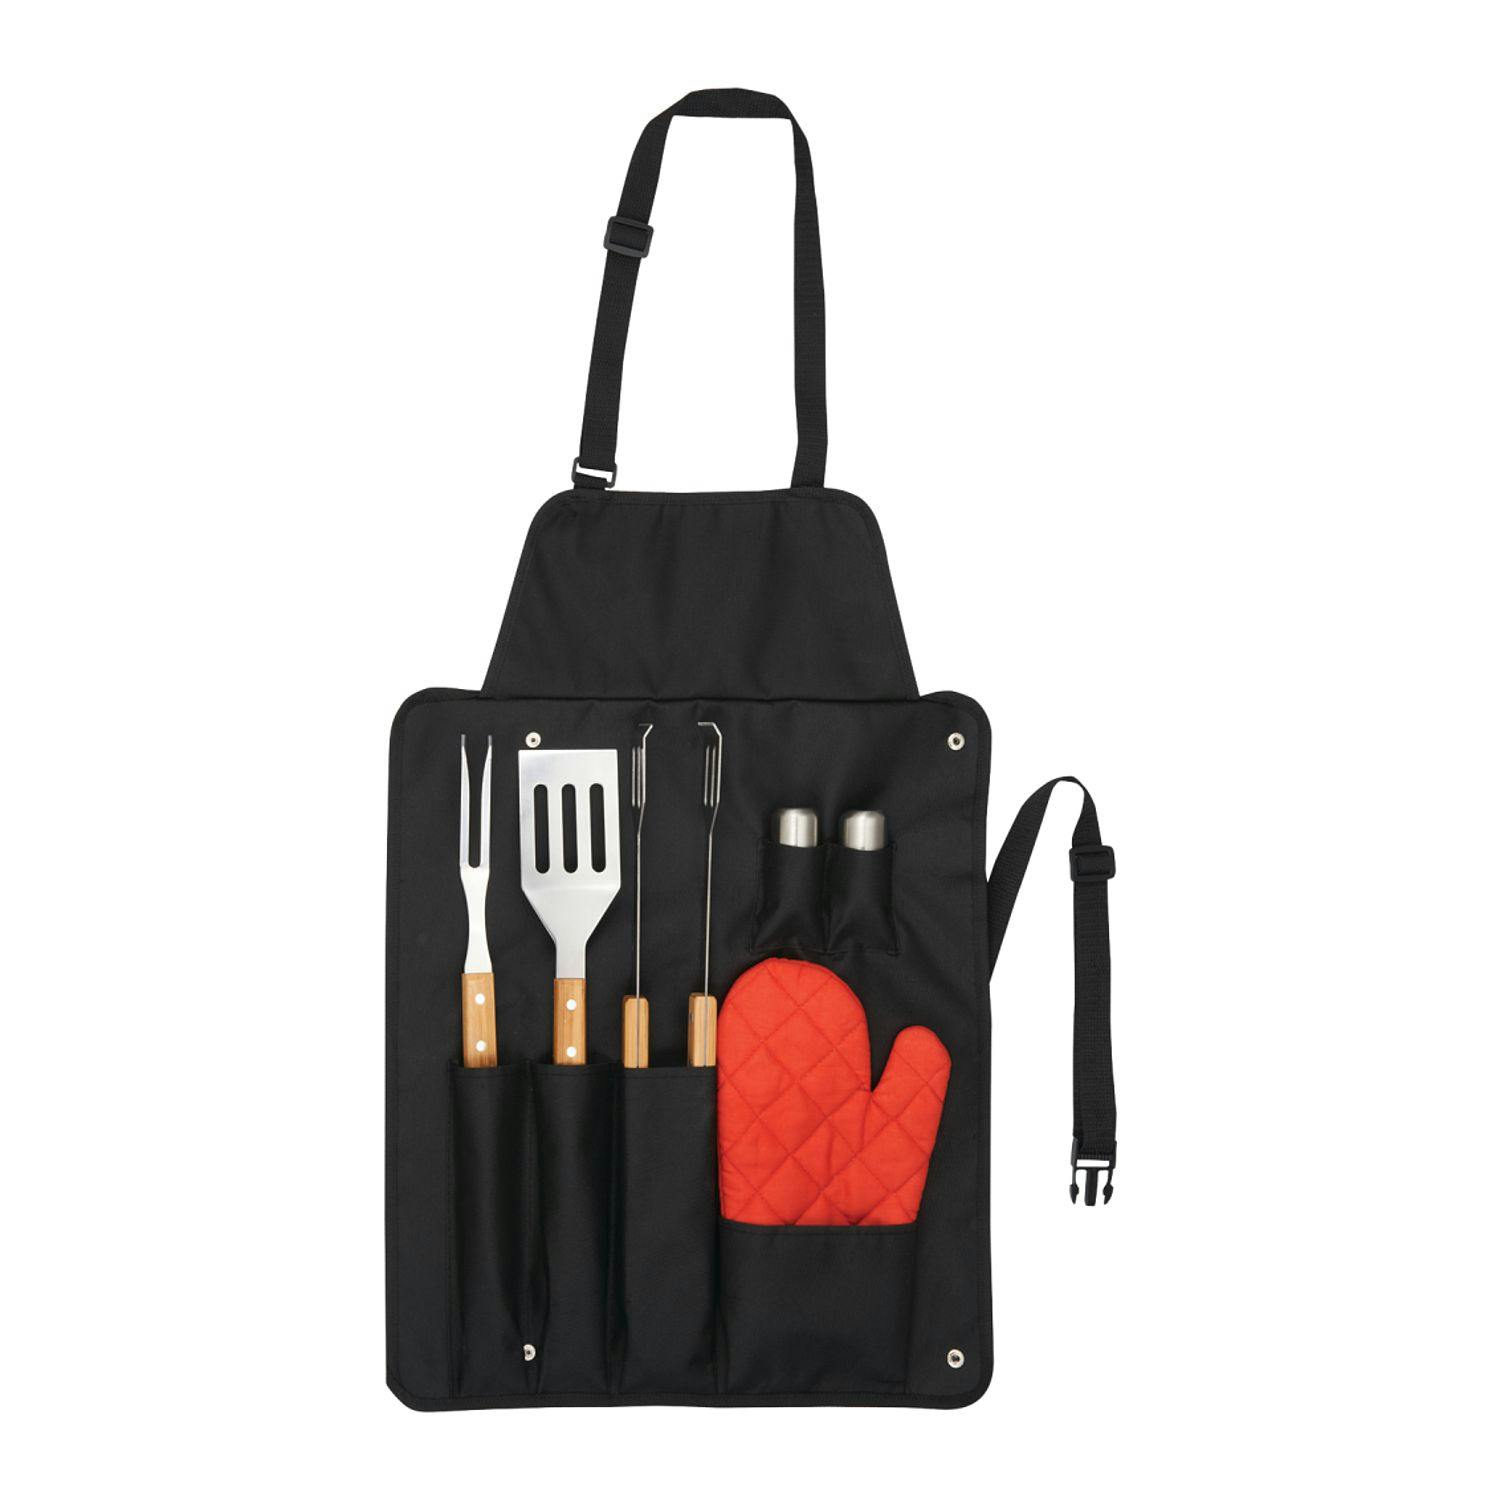 BBQ Now Apron and 7 piece BBQ Set - additional Image 2